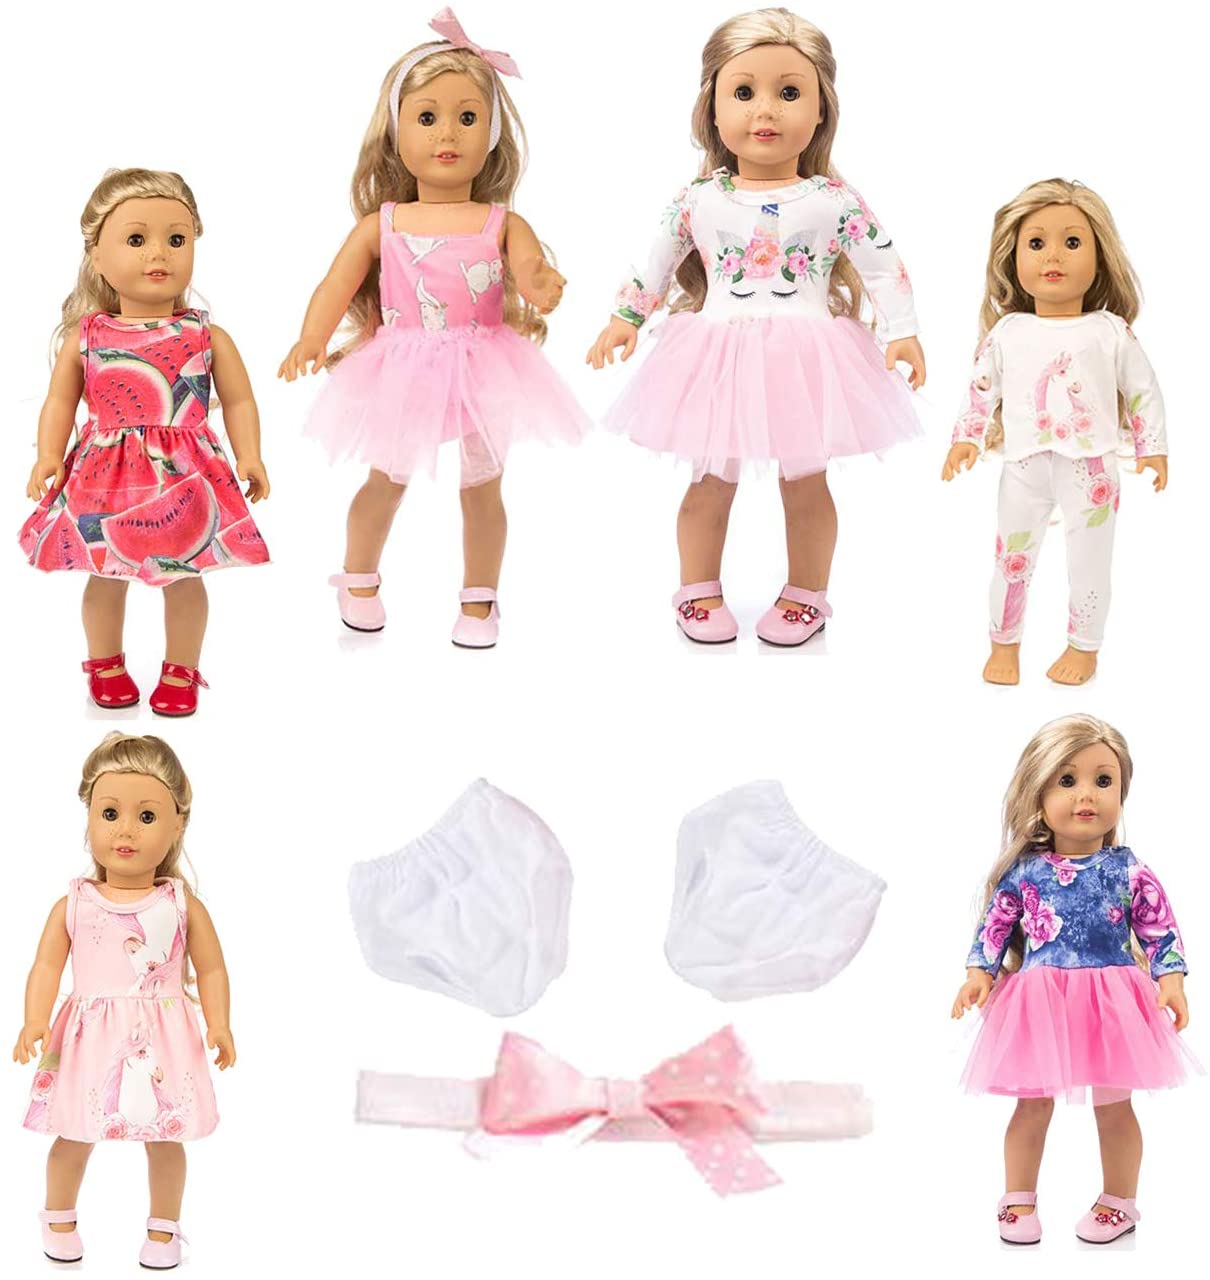 axxxt Gift American Girl Doll Clothes, 18-Inch